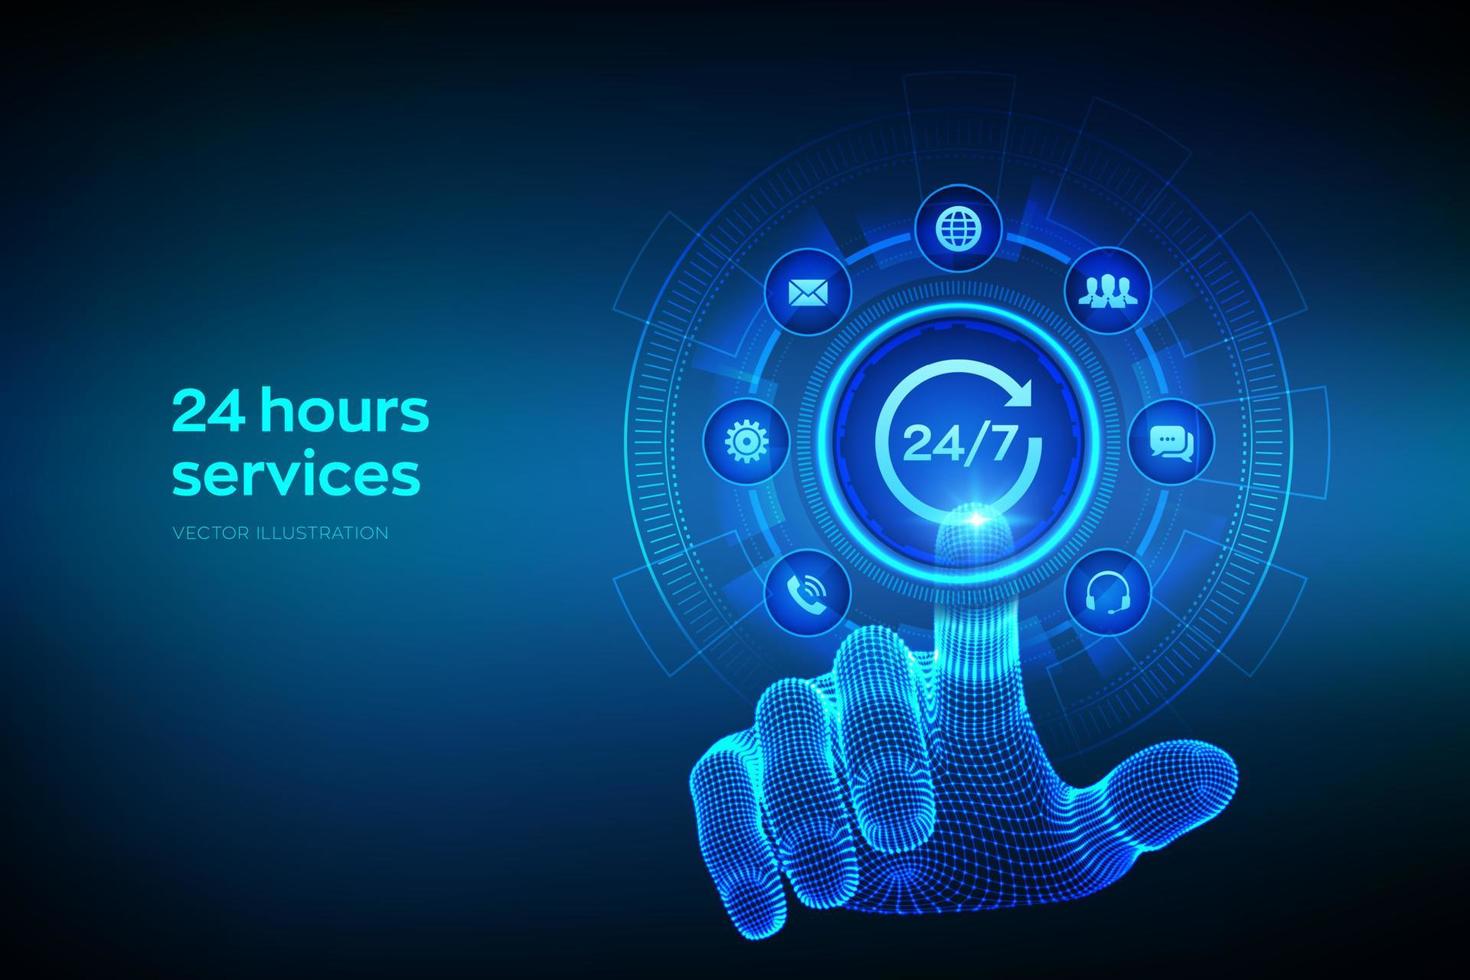 24 hours servises. 24-7 support. Technical support. Customer help. Tech support. Customer service, Business and technology concept. Wireframe hand touching digital interface. Vector illustration.